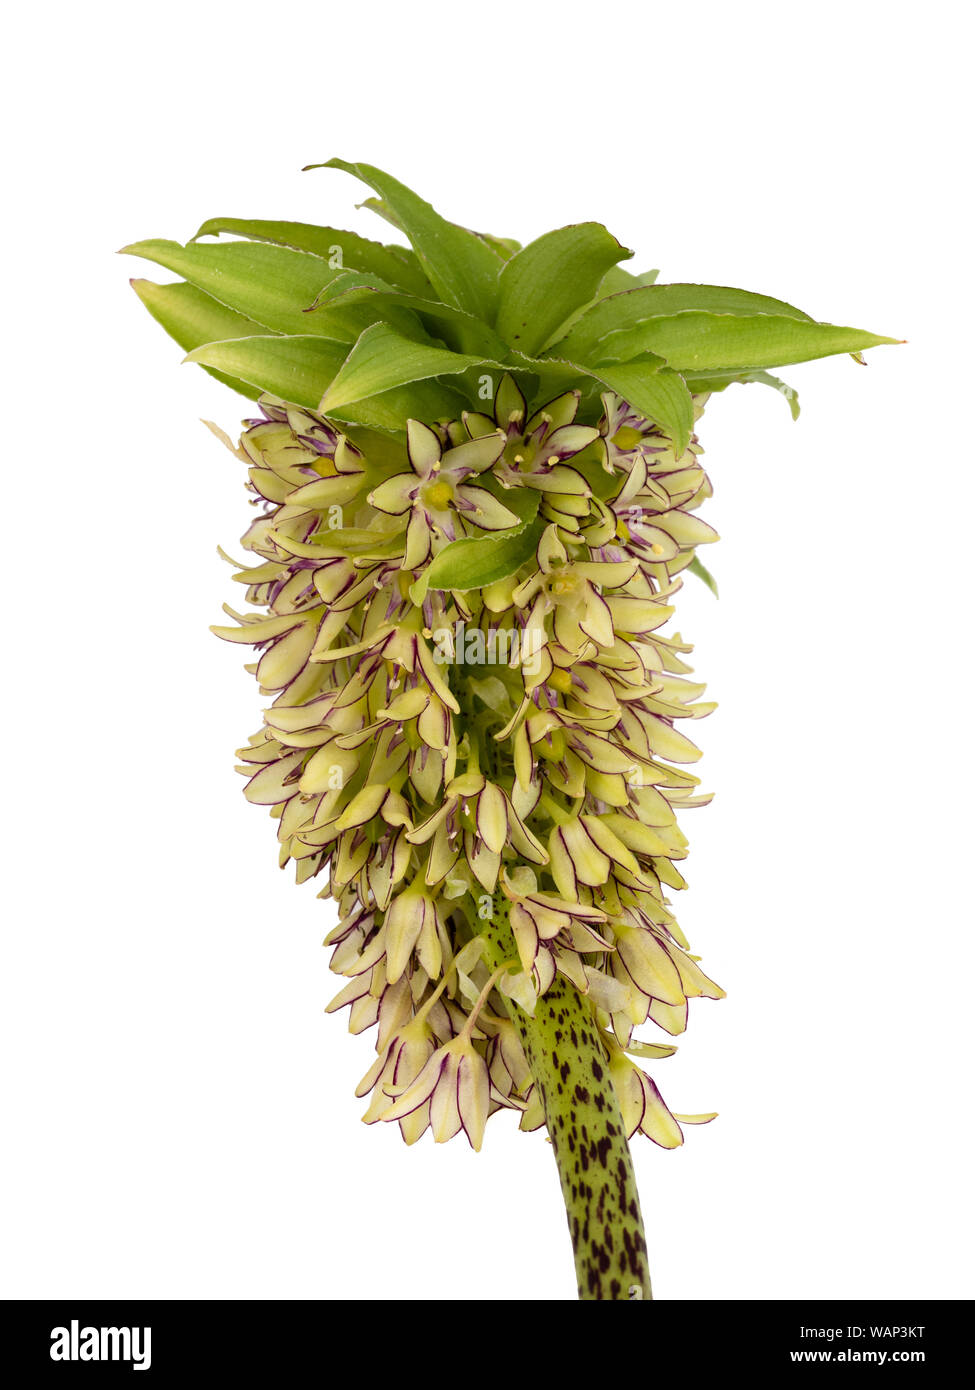 Flower spike of the half-hardy South African pineapple lily, Eucomis bicolor, on a white background Stock Photo